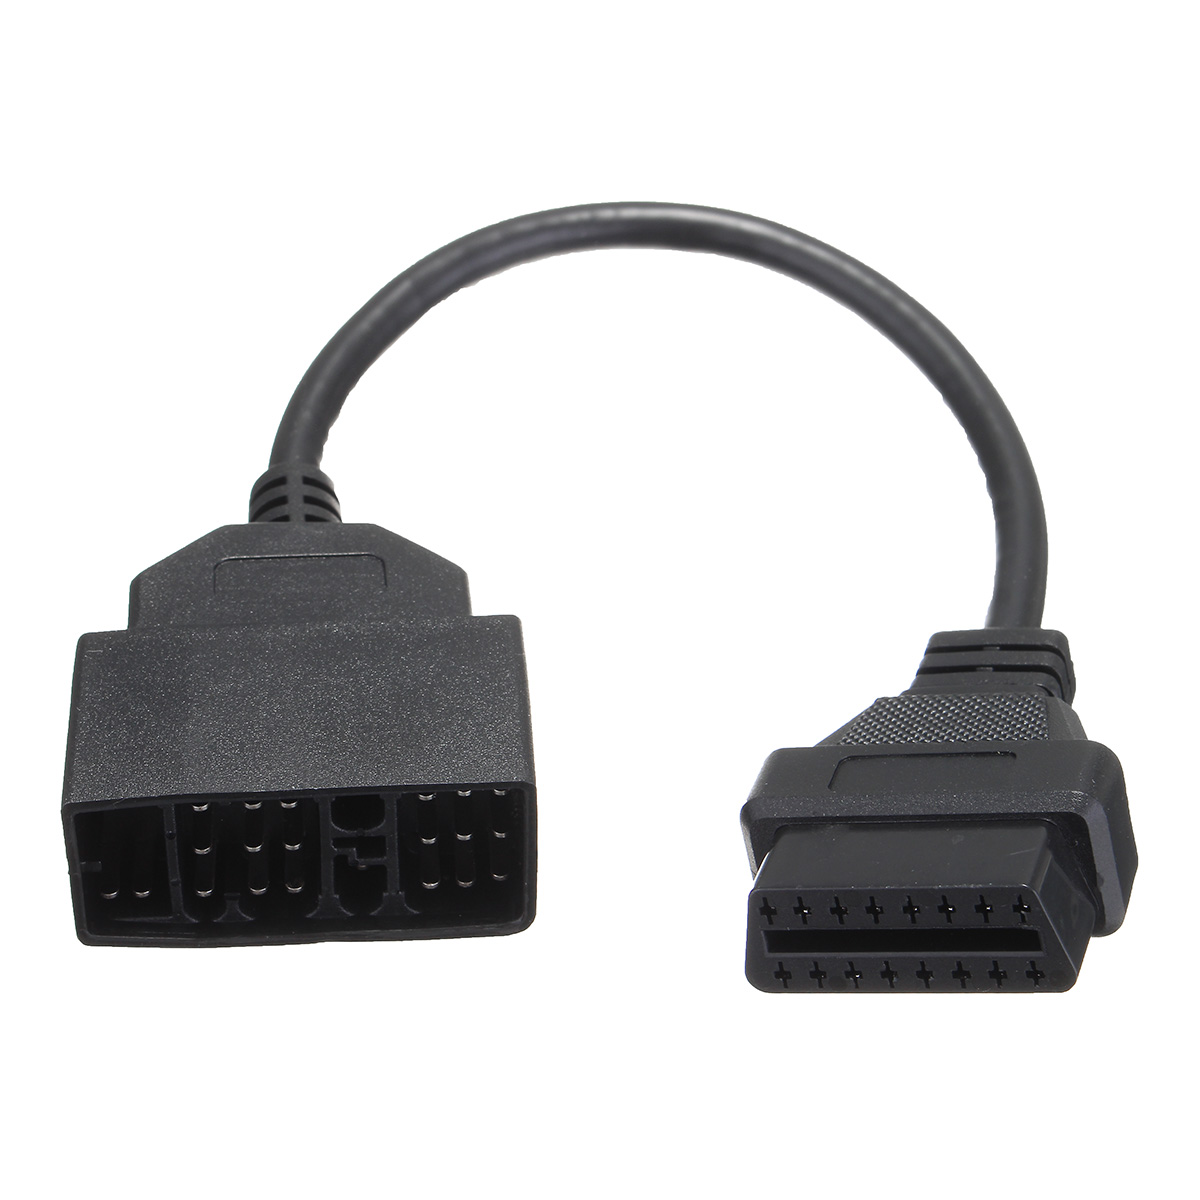 

22 Pin OBD1 to 16 Pin OBD2 Convertor Adapter Cable for TOYOTA Diagnostic Scanner